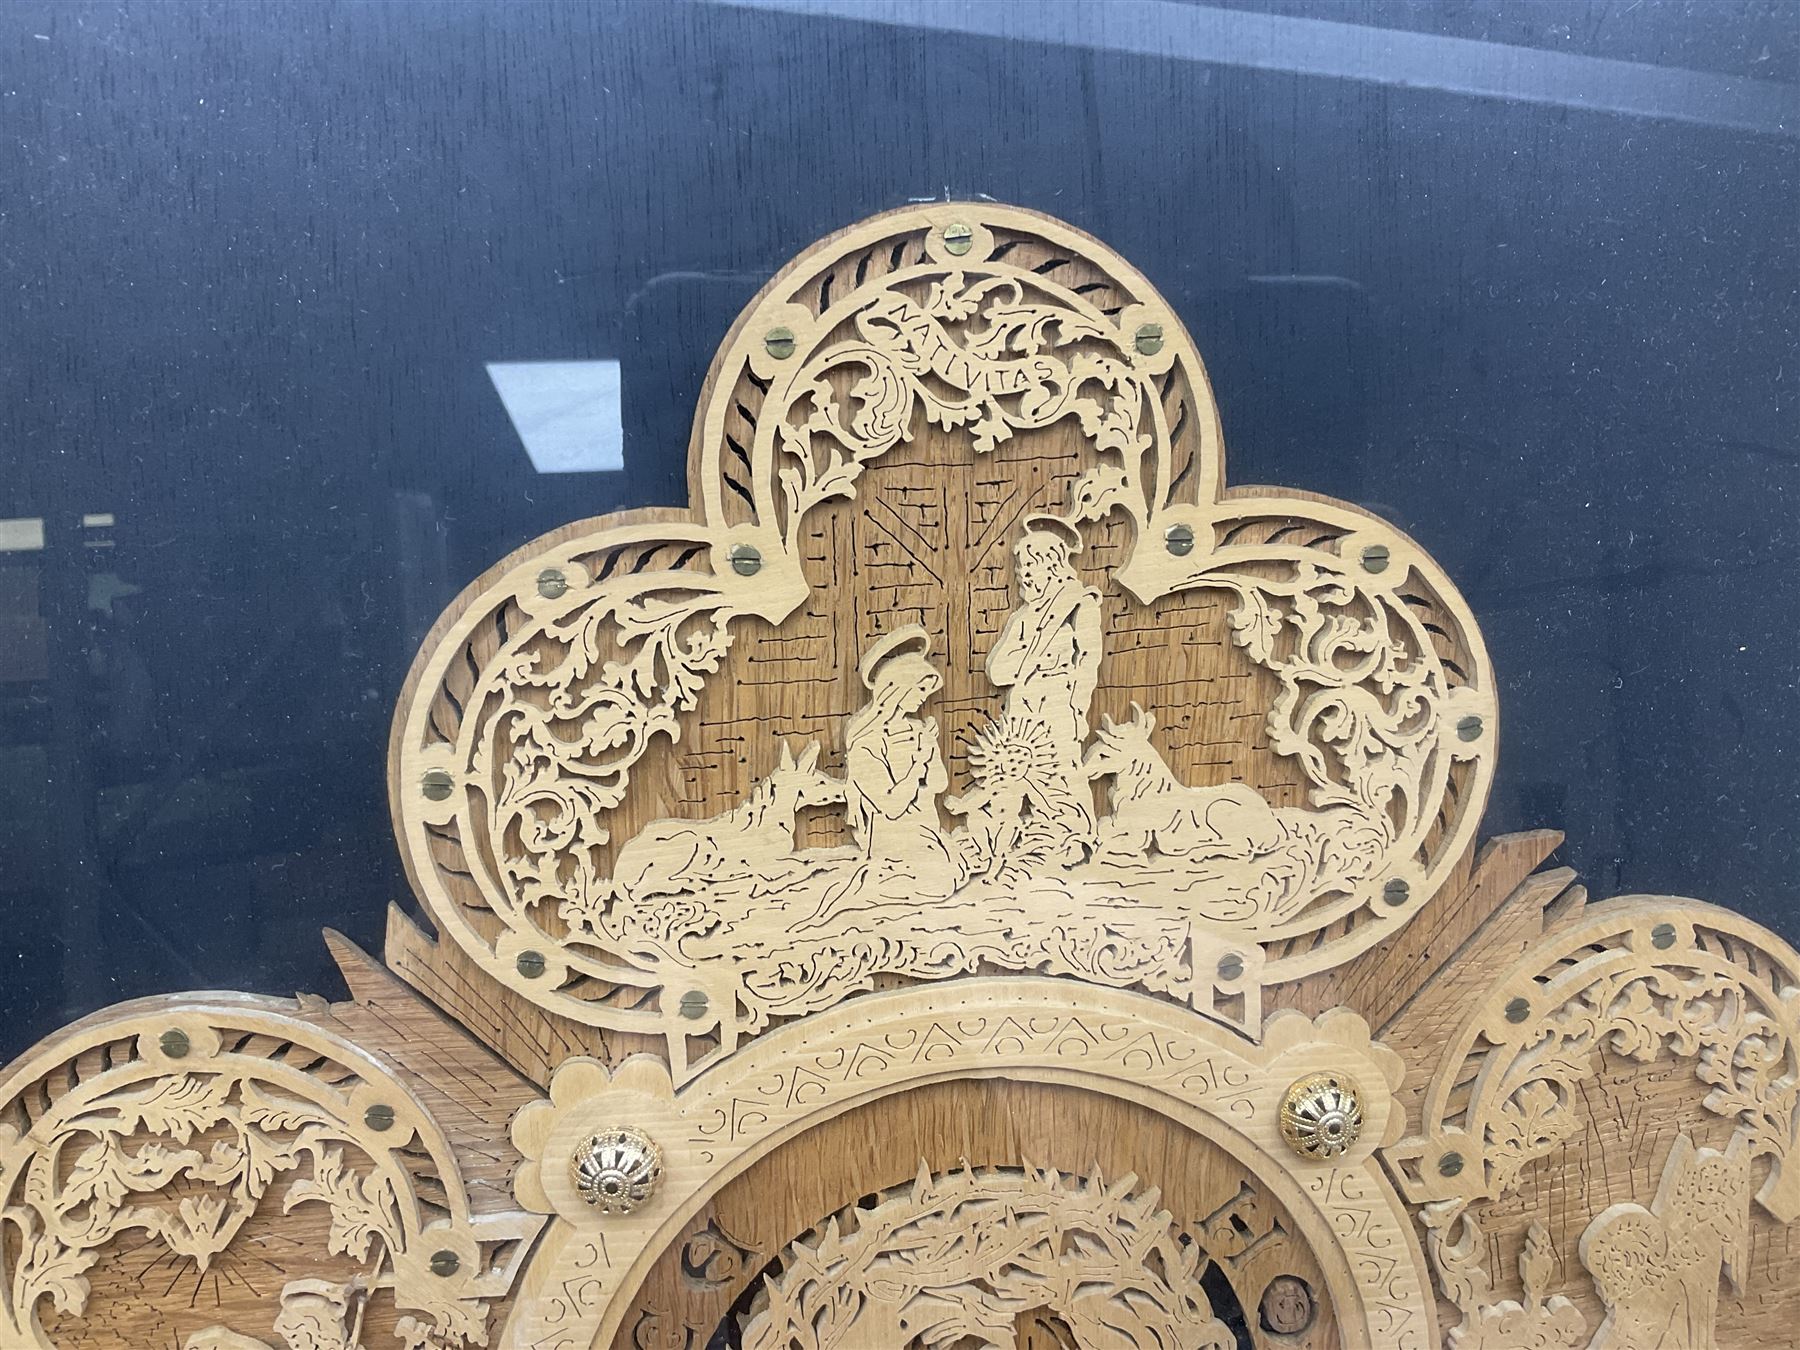 Cork carving of a religious cross depicting intricate scenes of various religious figures and motifs - Image 2 of 9